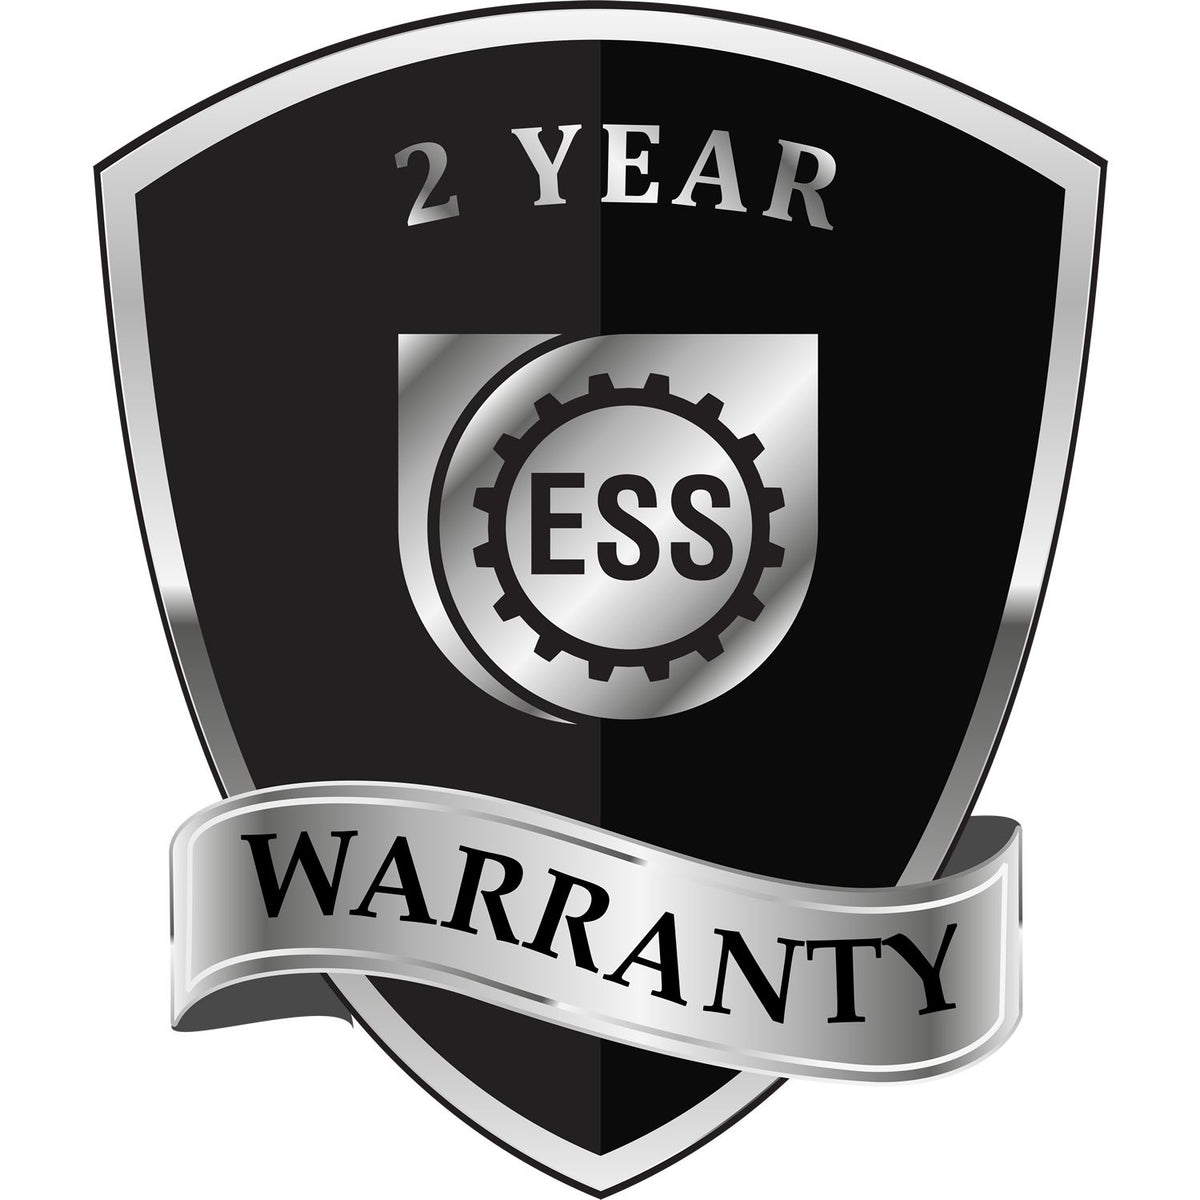 A badge or emblem showing a warranty icon for the Extended Long Reach Idaho Surveyor Embosser